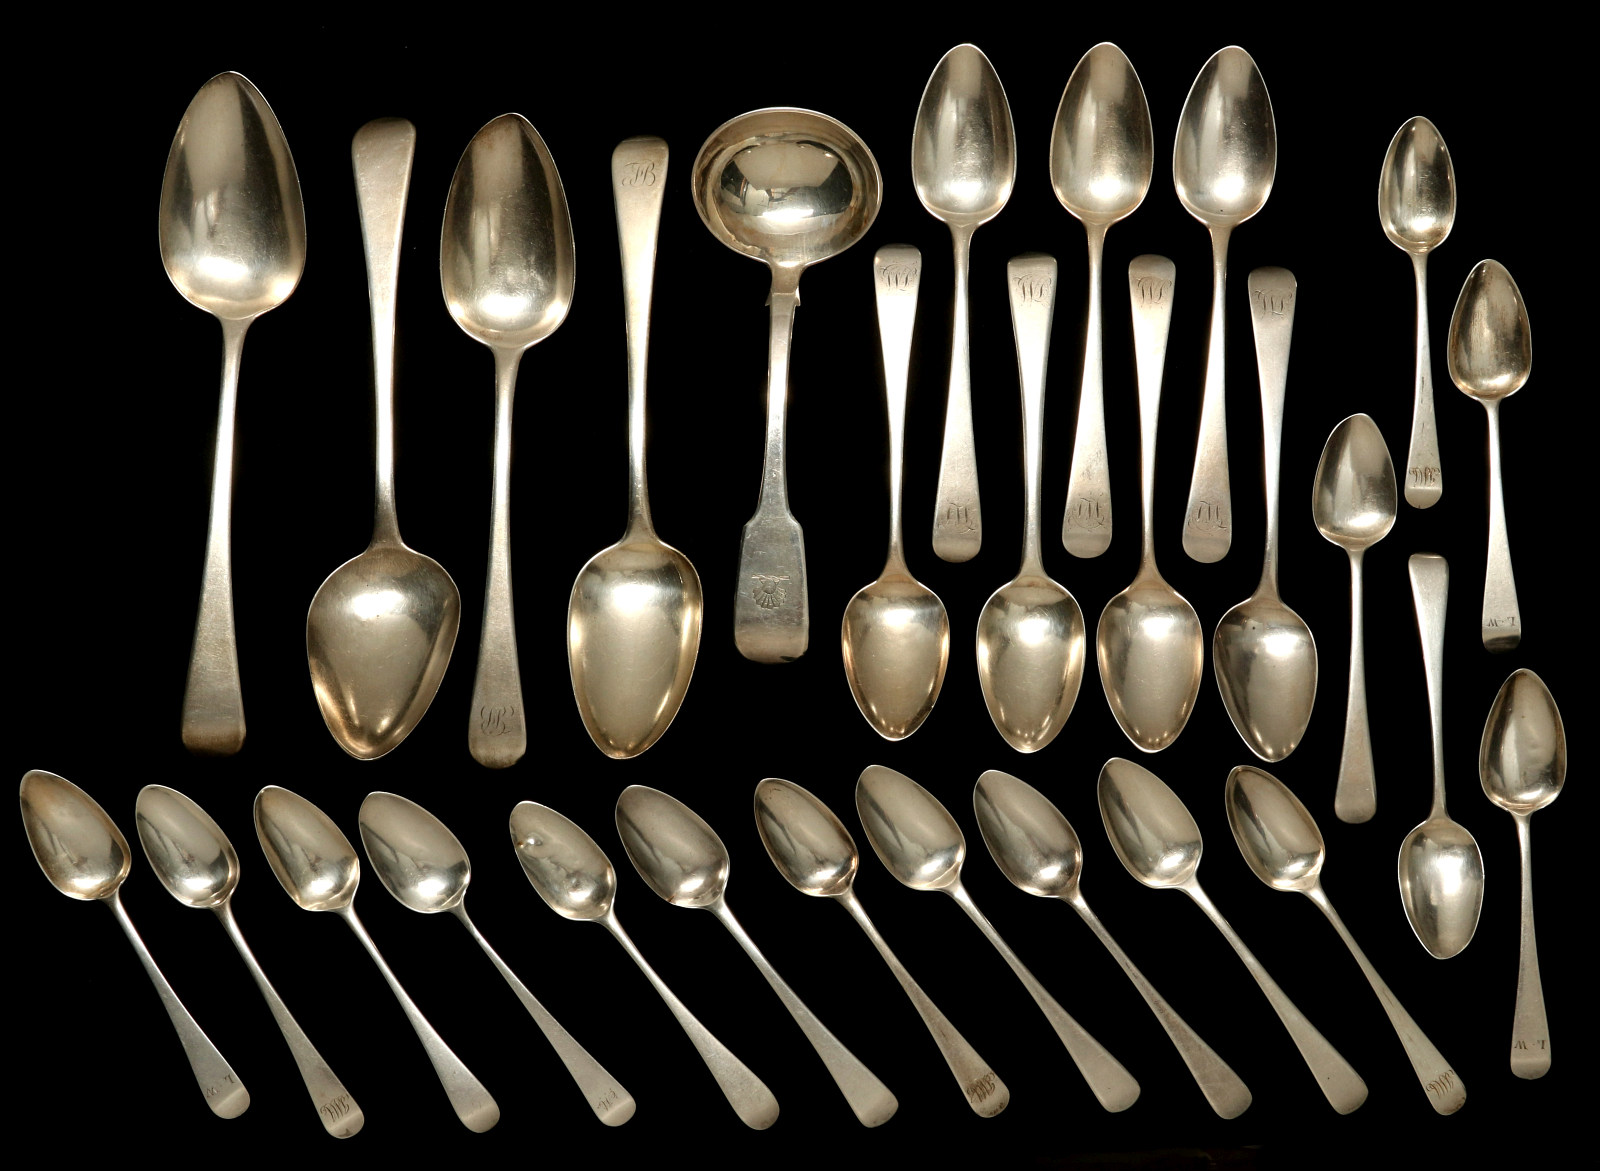 A COLLECTION OF GEORGIAN STERLING SPOONS C. 1800